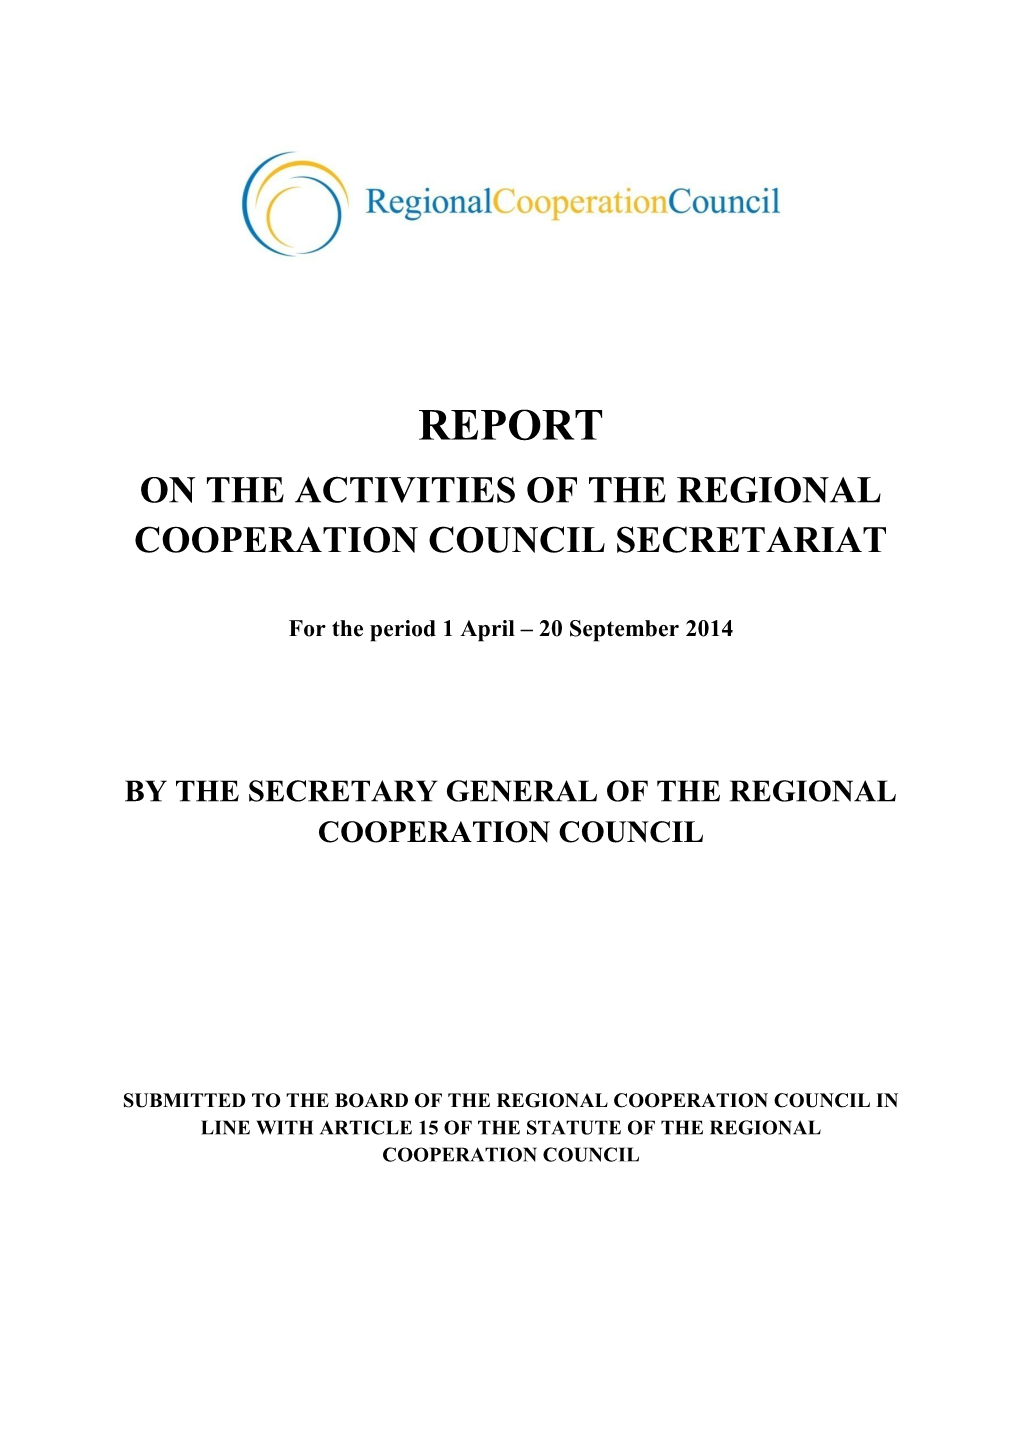 On the Activities of the Regional Cooperation Council Secretariat